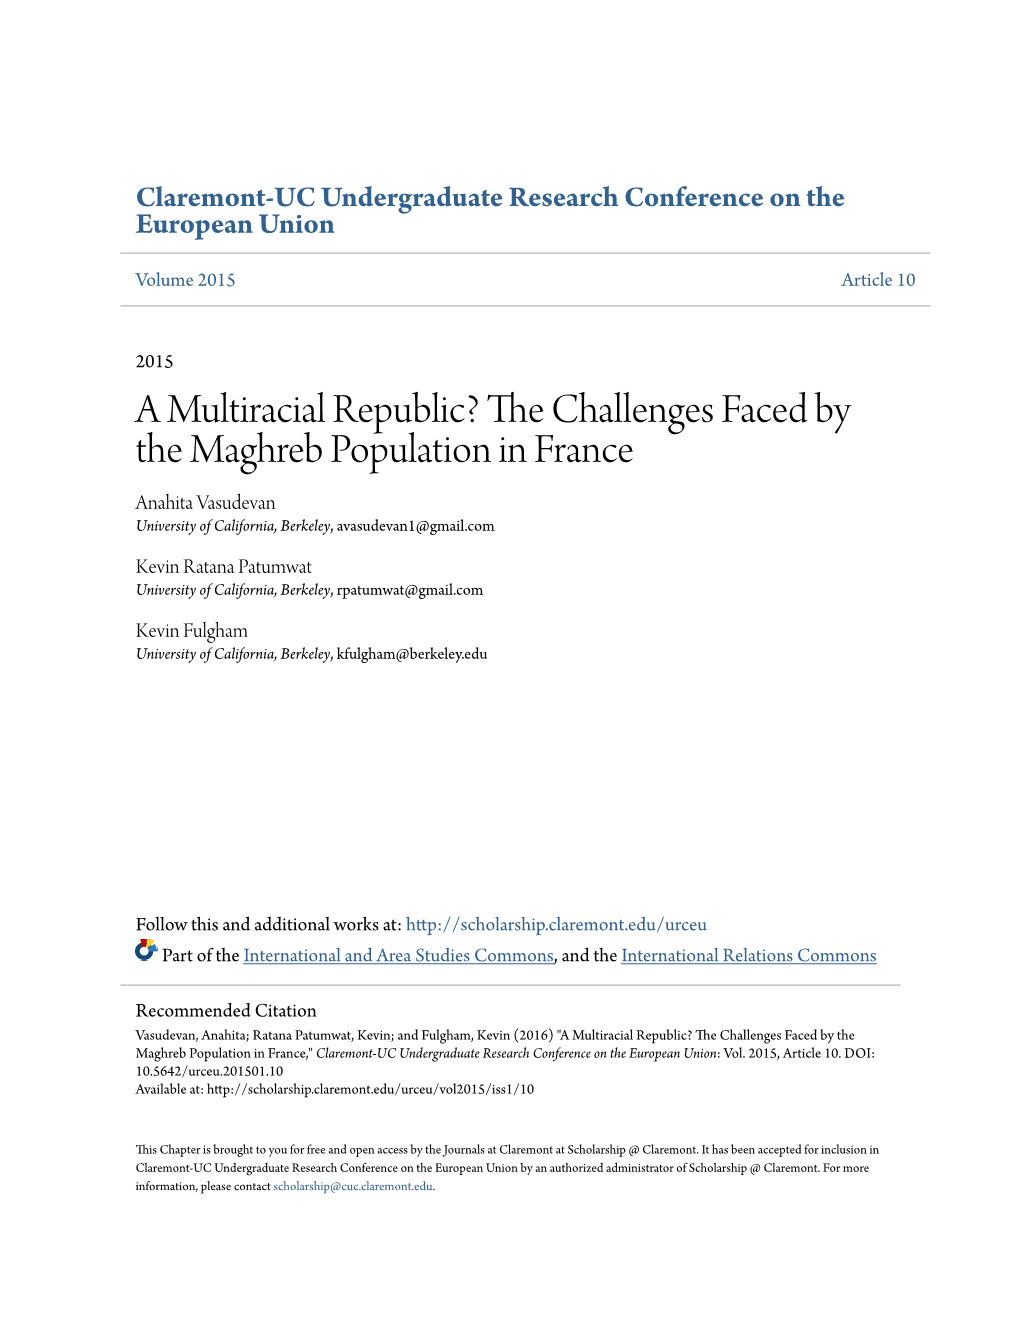 A Multiracial Republic? the Challenges Faced by the Maghreb Population in France